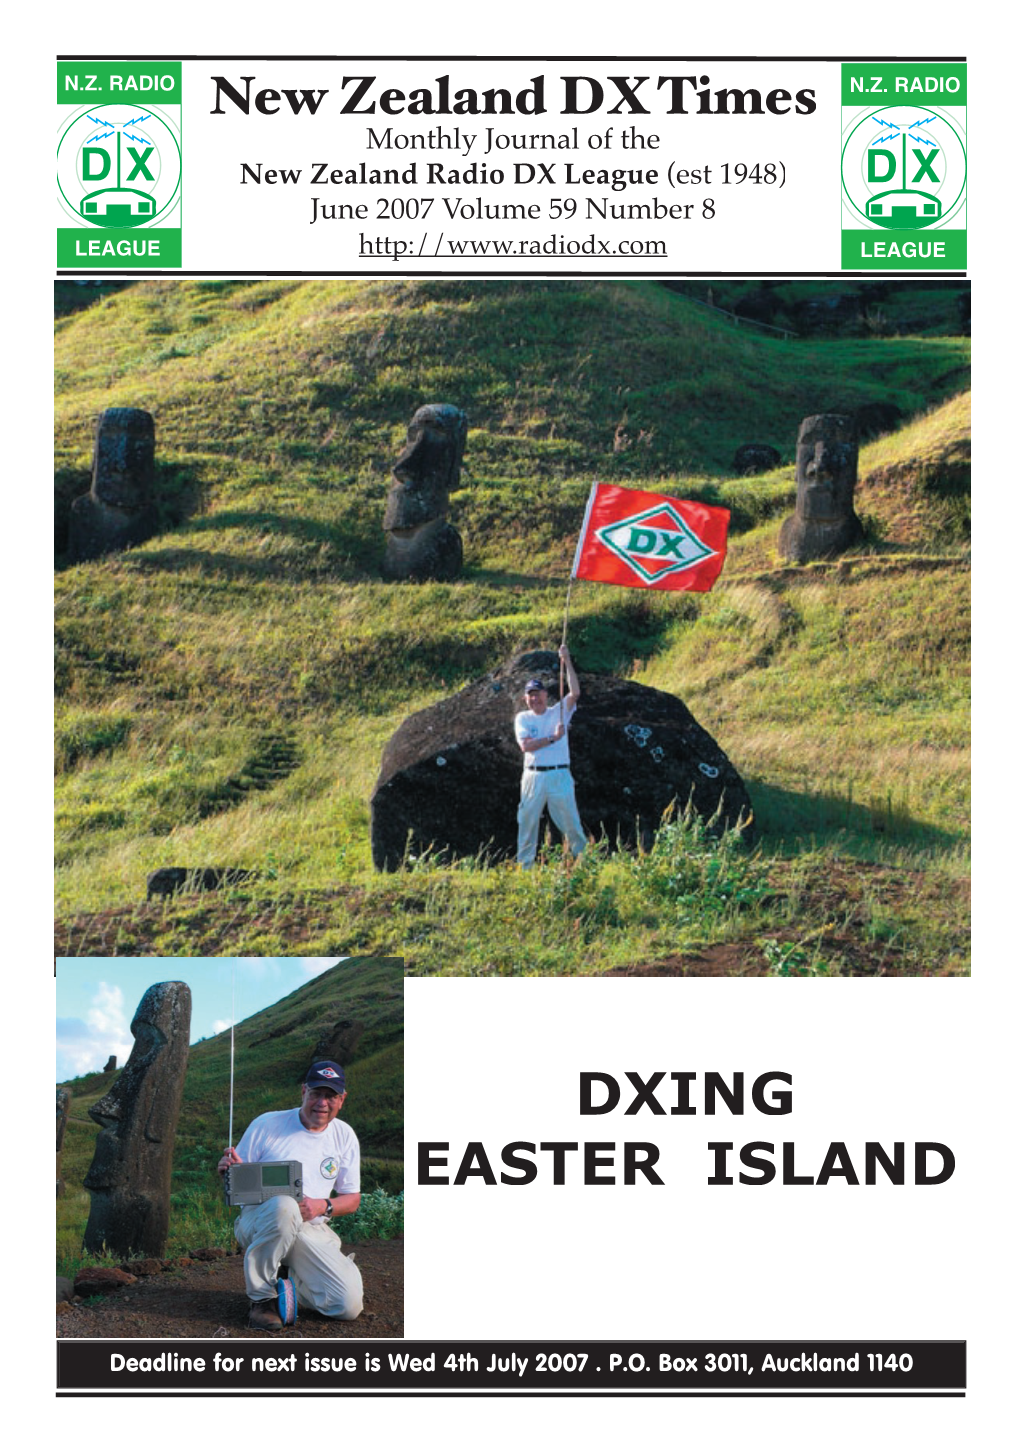 Dxing Easter Island